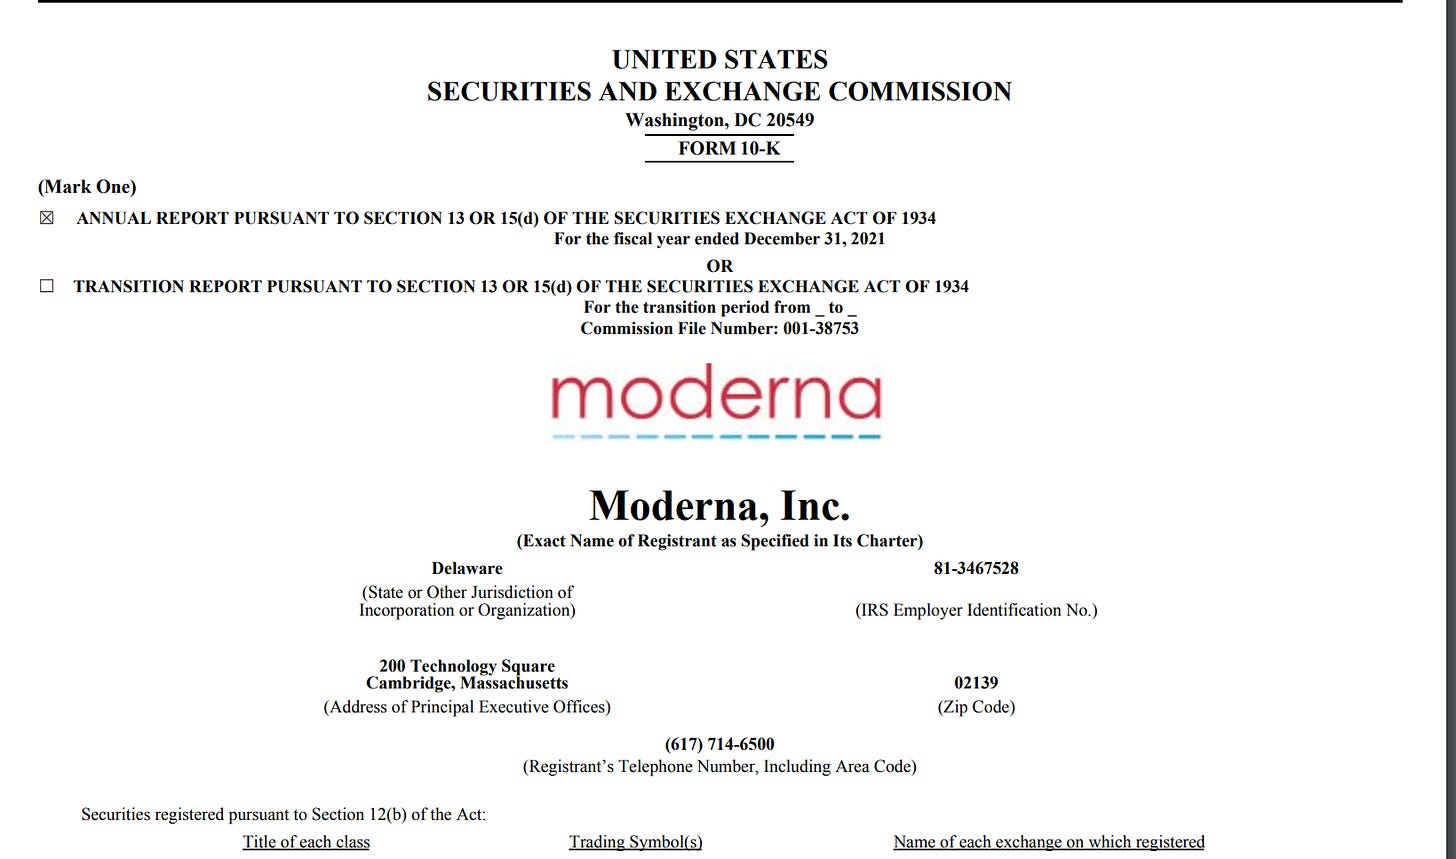 Moderna SEC Filing: We May Be Delayed or Prevented From Receiving Full